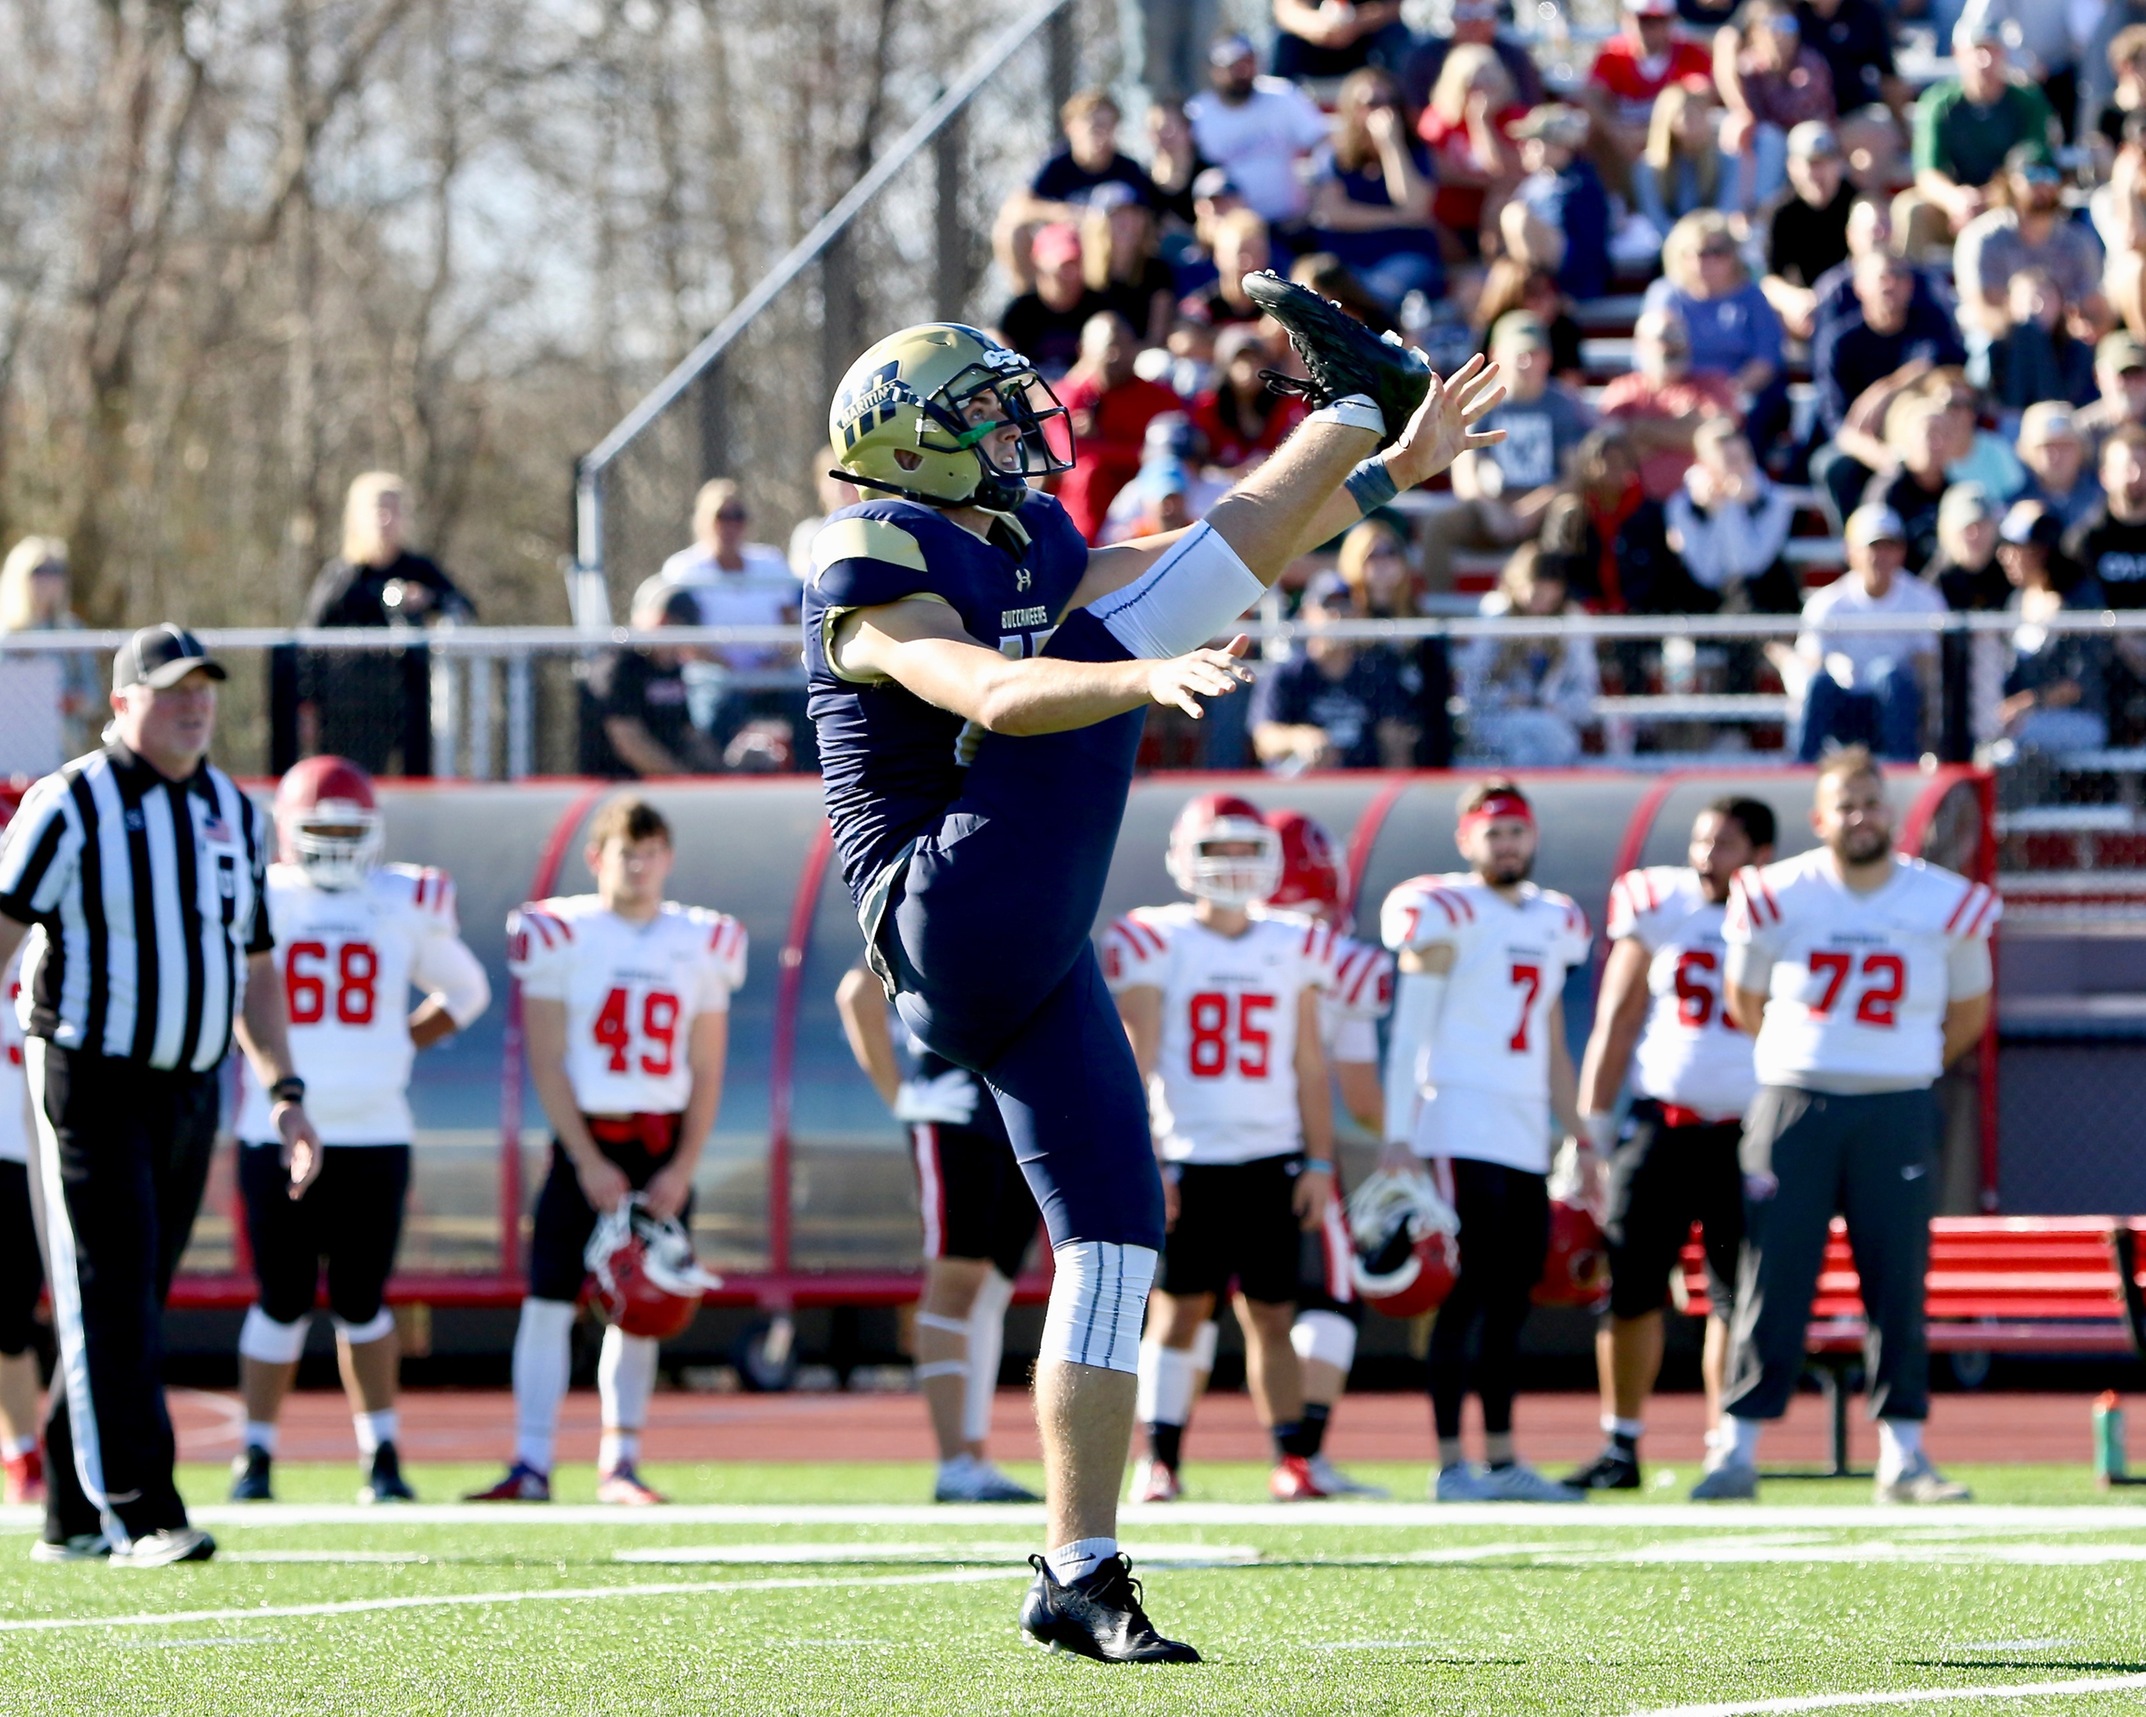 Mulligan Named to D3Football.com Team of the Week